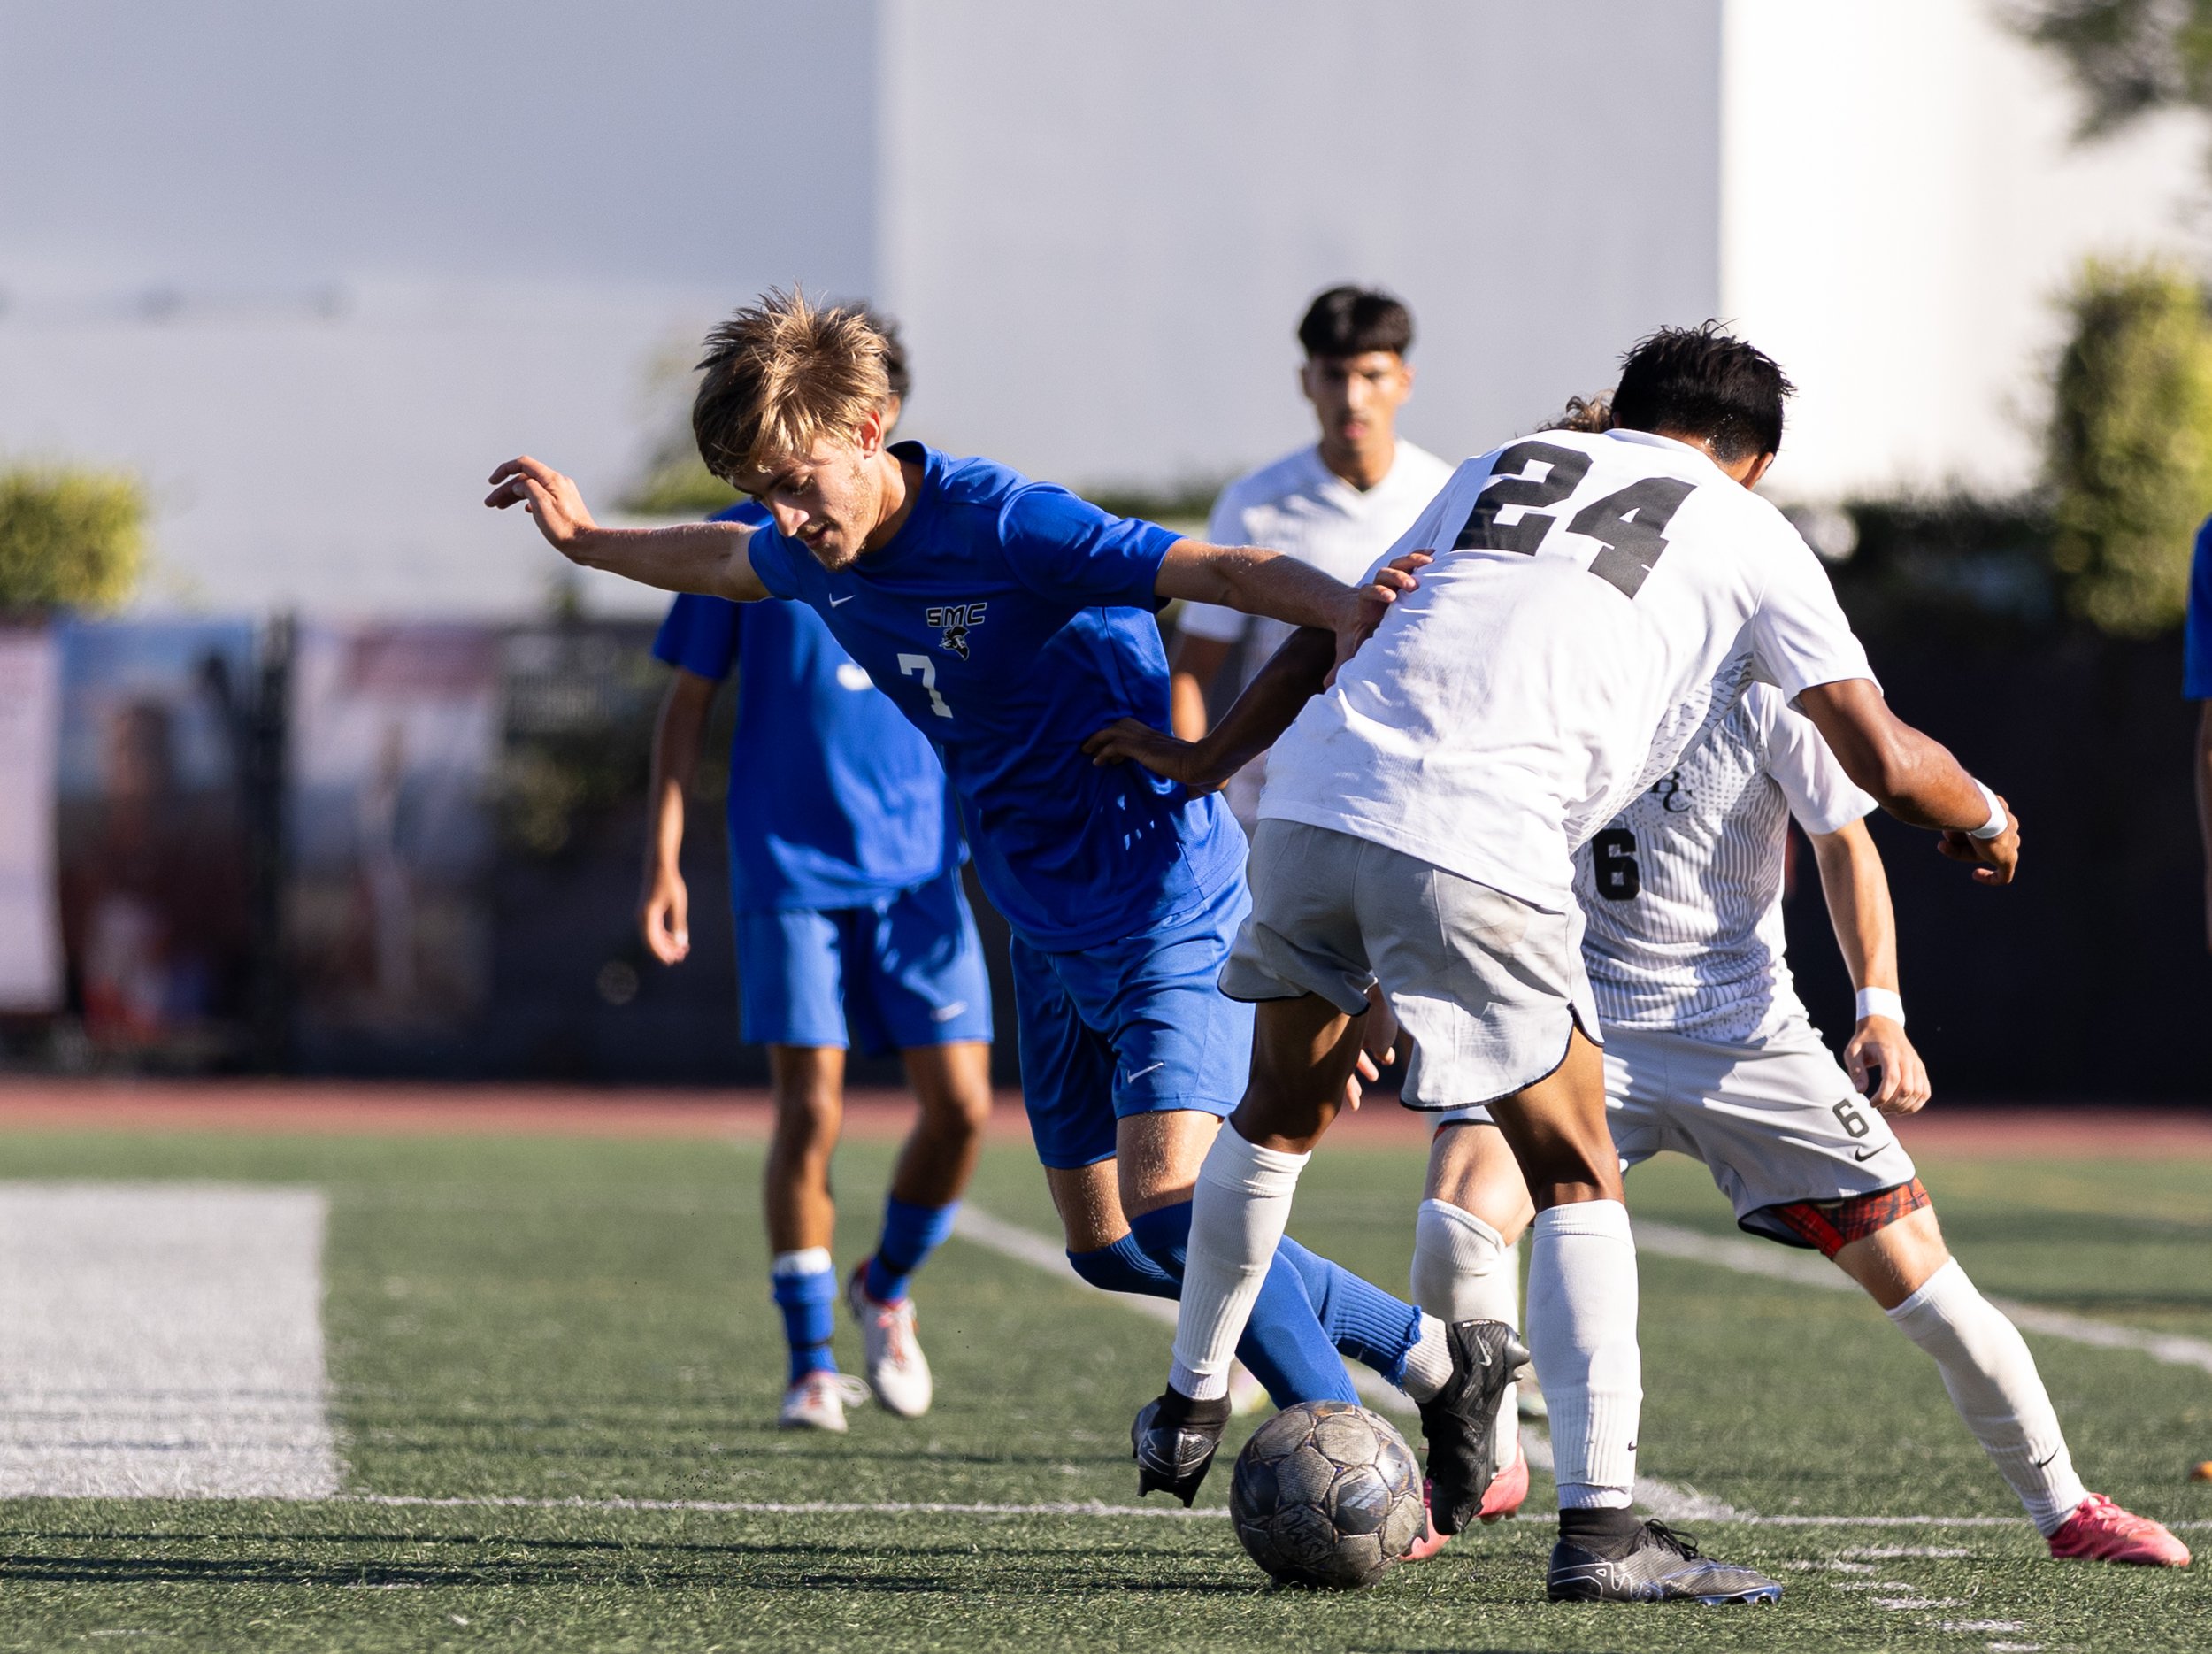  Santa Monica College(SMC) men's soccer forward Darren Lewis(7) being pocketed by Bakersfield Renegade defender Joe Estrada(24) on Tues, Oct. 3. SMC would go and shutout the Renegades with a score of 3-0 at Corsair Field in Santa Monica, Calif. (Dani